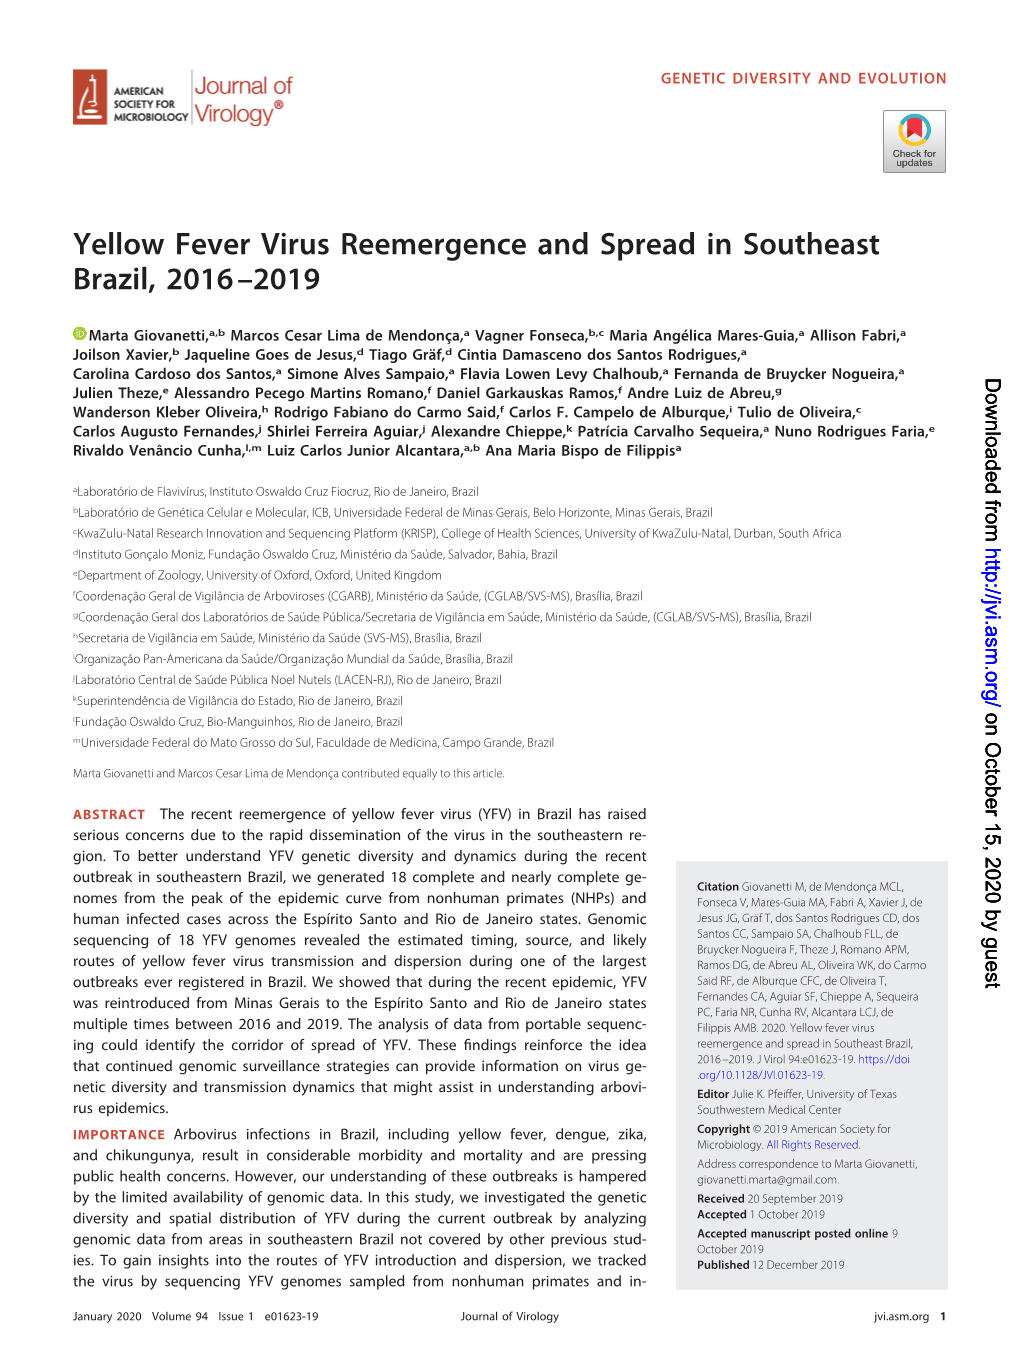 Yellow Fever Virus Reemergence and Spread in Southeast Brazil, 2016–2019